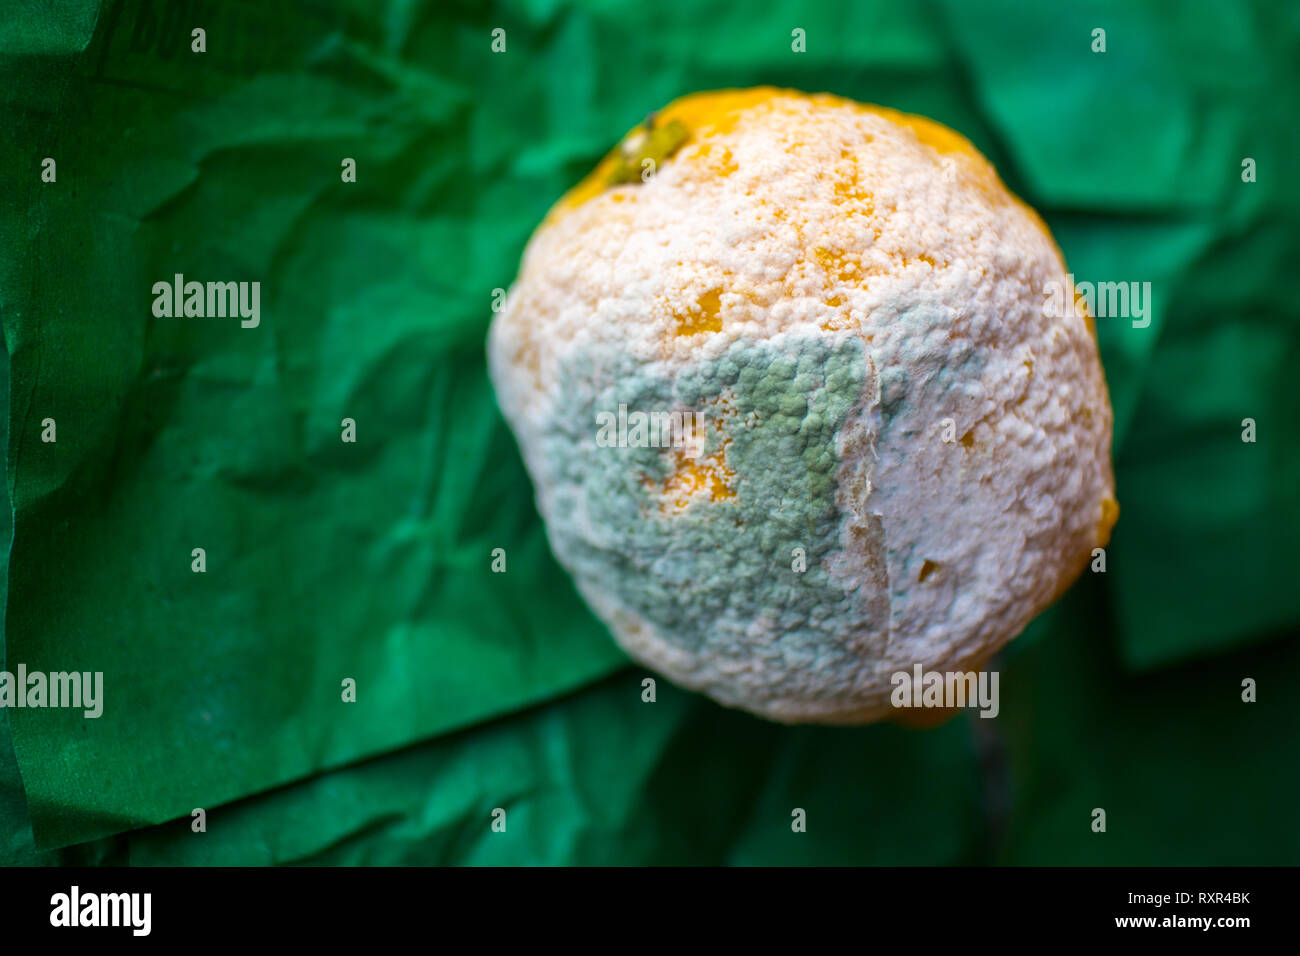 isolated, rotten, decayed, rotten lemon on a green drape Stock Photo